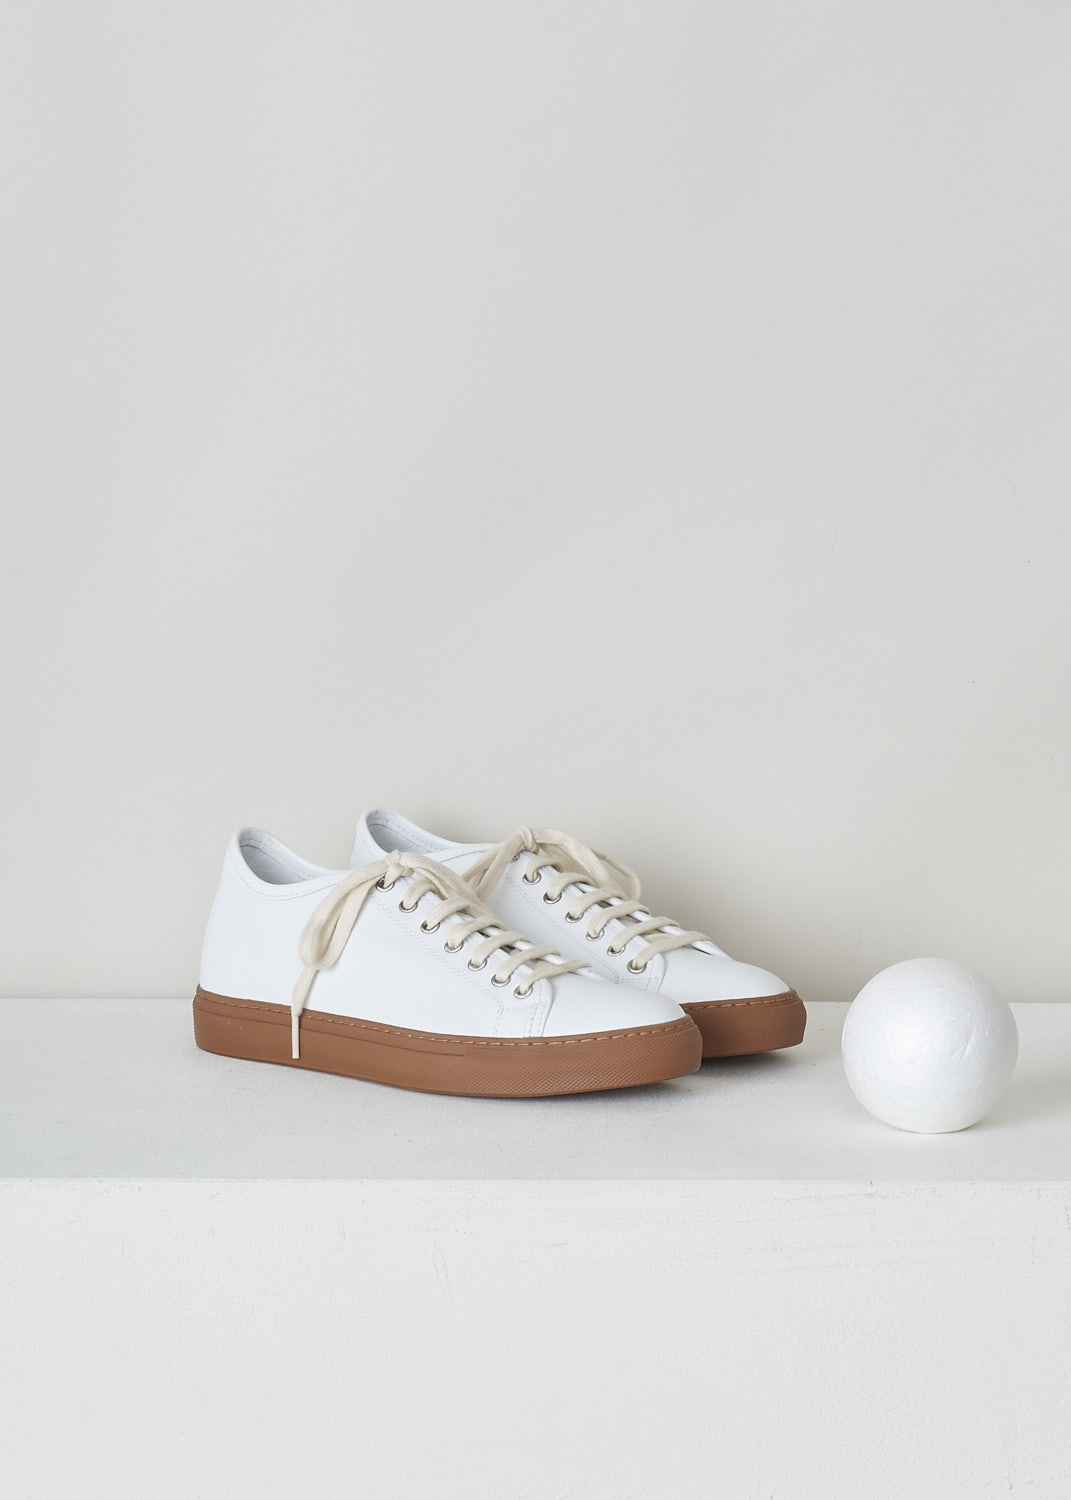 SOFIE D’HOORE, WHITE LEATHER SNEAKERS, FRIDA_LCOL_WHITE_CARAMEL, White, Brown, Front, These low-top white leather sneakers feature front lace-up fastening and a flat brown rubber sole. The sneakers come with additional pair of black laces.
